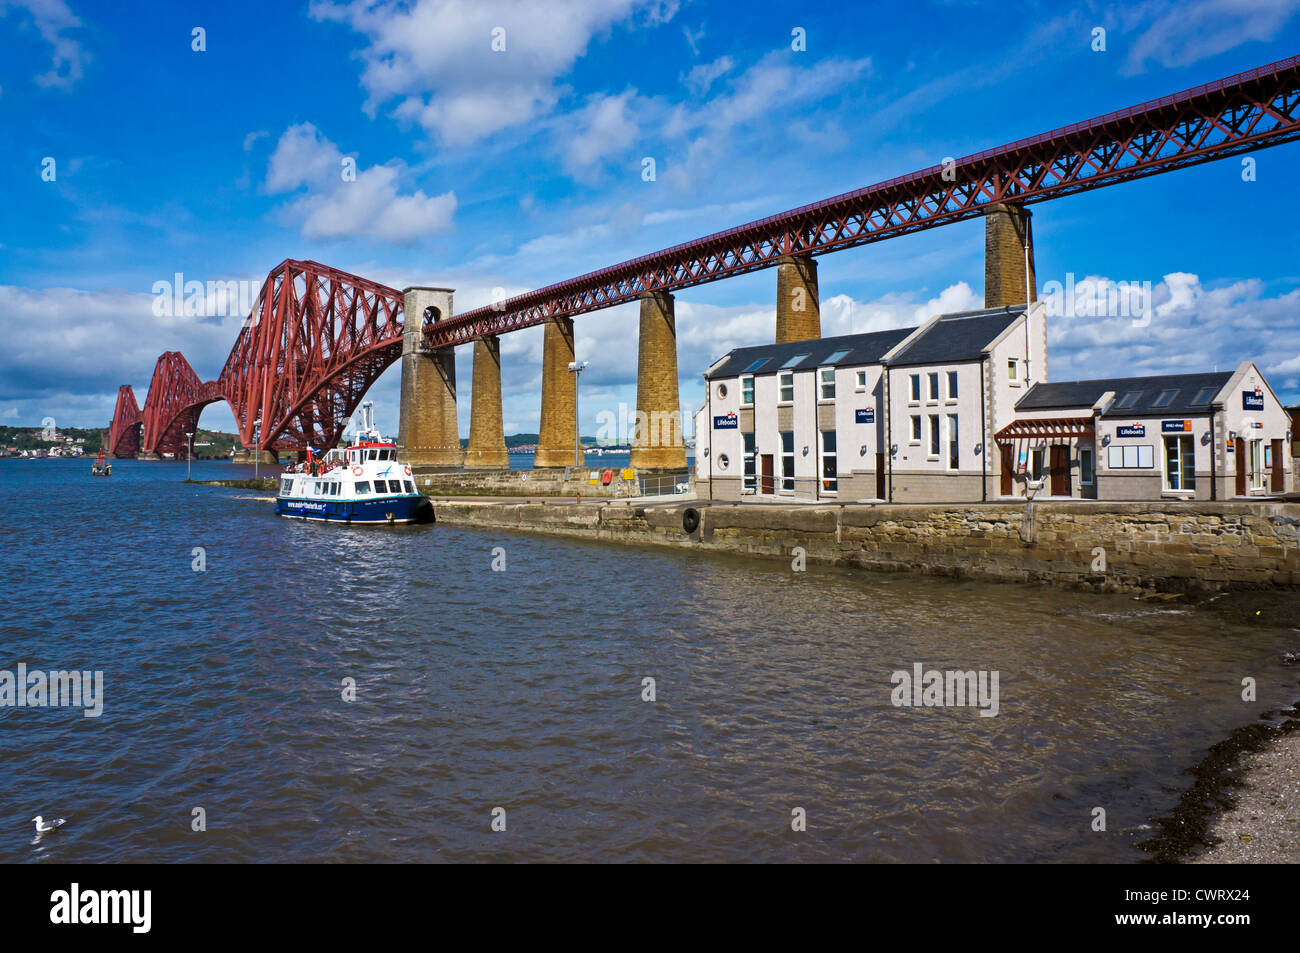 The iconic Forth Rail bridge and pier with buildings and Maid of the Forth at South Queensferry Scotland Stock Photo